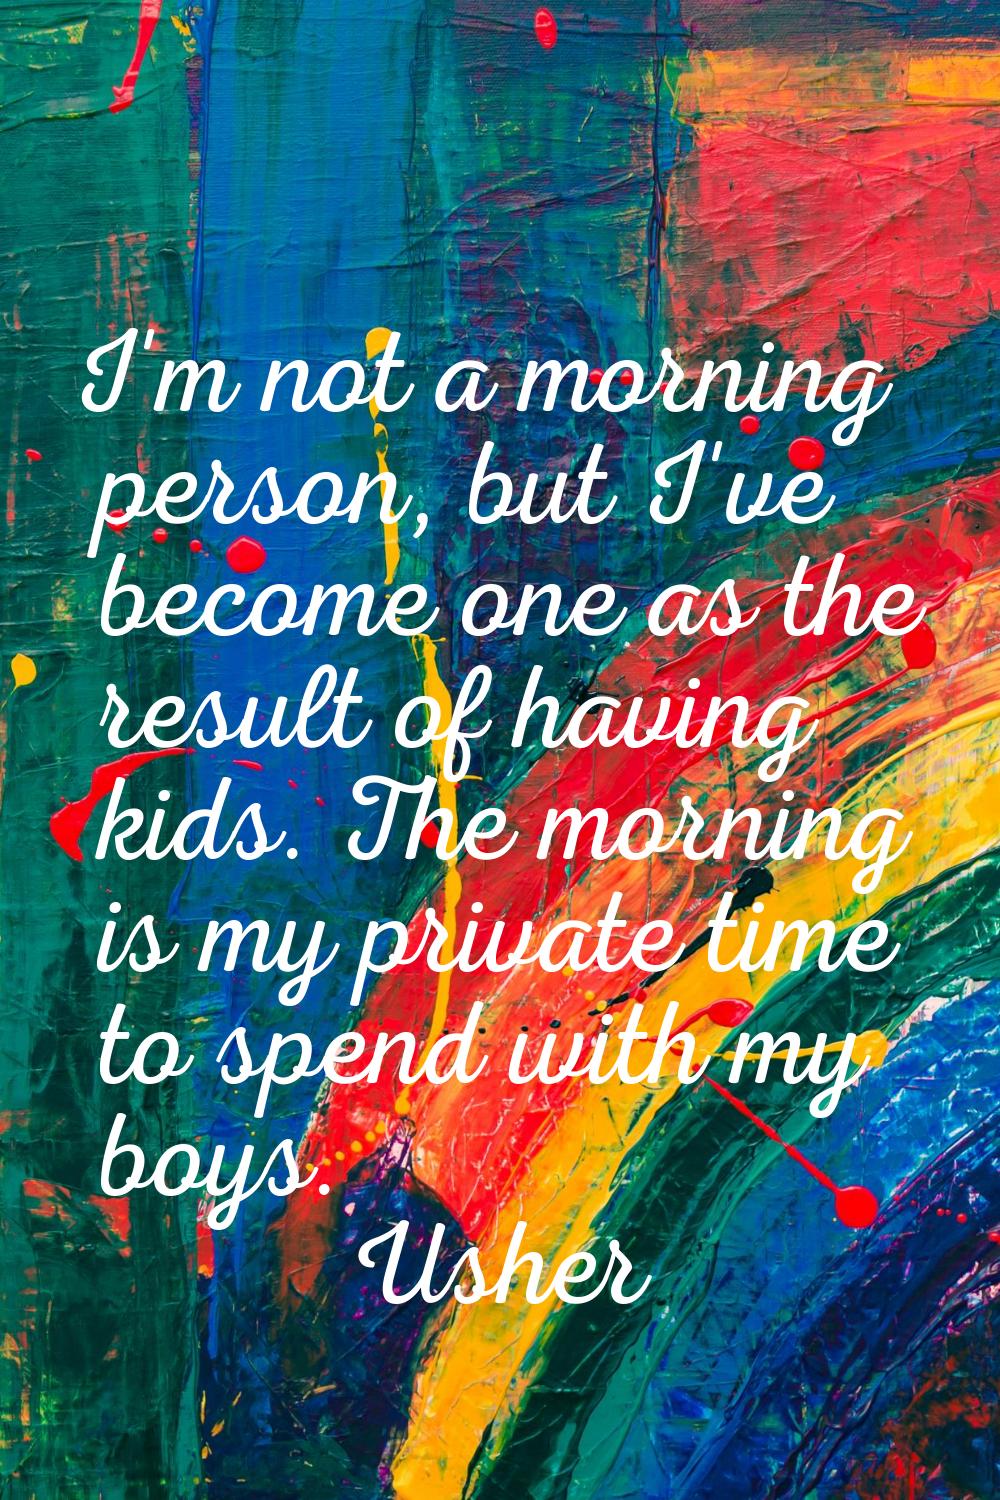 I'm not a morning person, but I've become one as the result of having kids. The morning is my priva